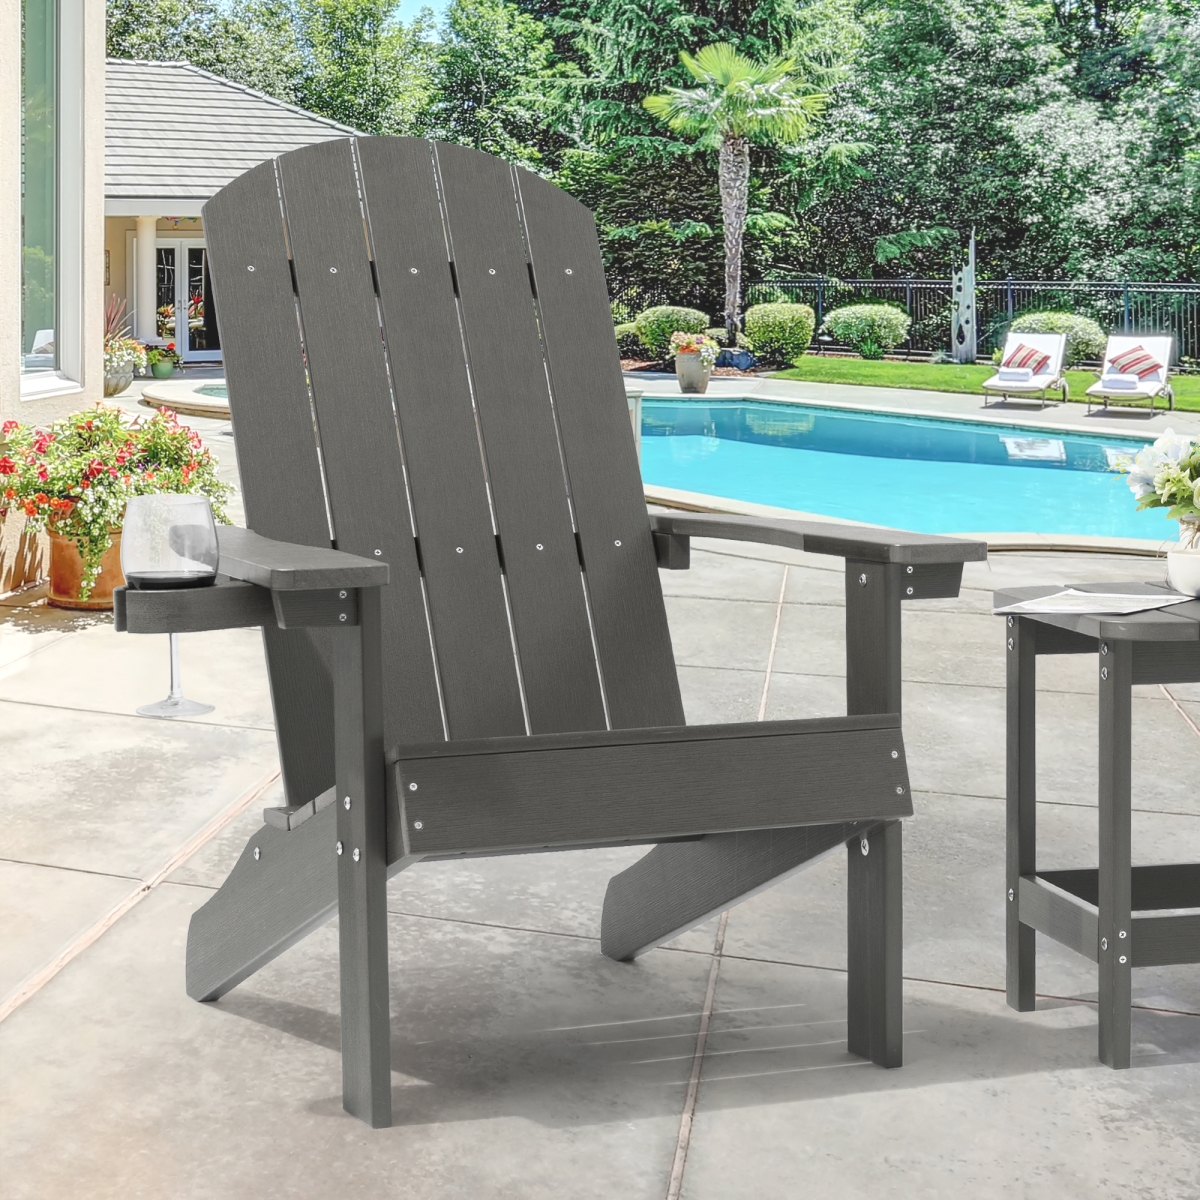 Picture of SANLUCE UN-AC-03-GY Charcoal Gray Recyled Plastic Weather Resistant Adirondack Chair with Cup Holder